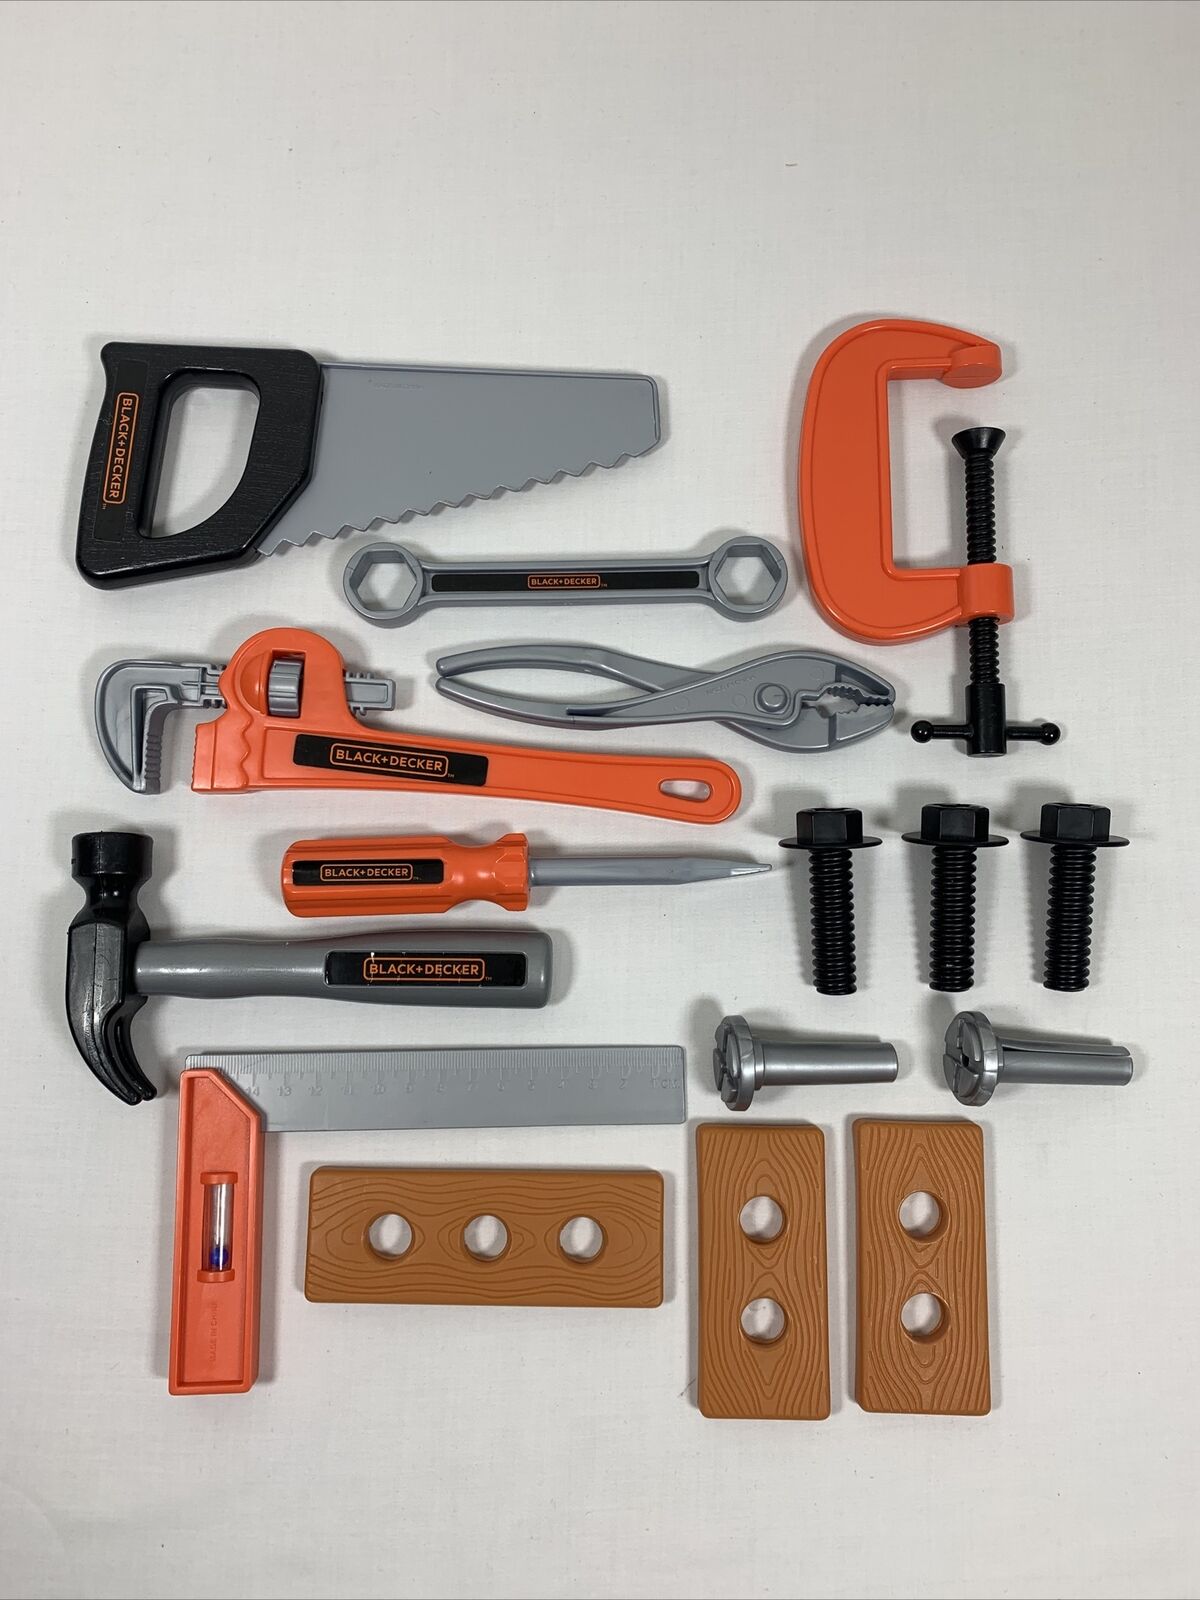 Black & Decker Kids Toy Tools Hammer Wrench & More Lot Of 16 Pieces Preowned